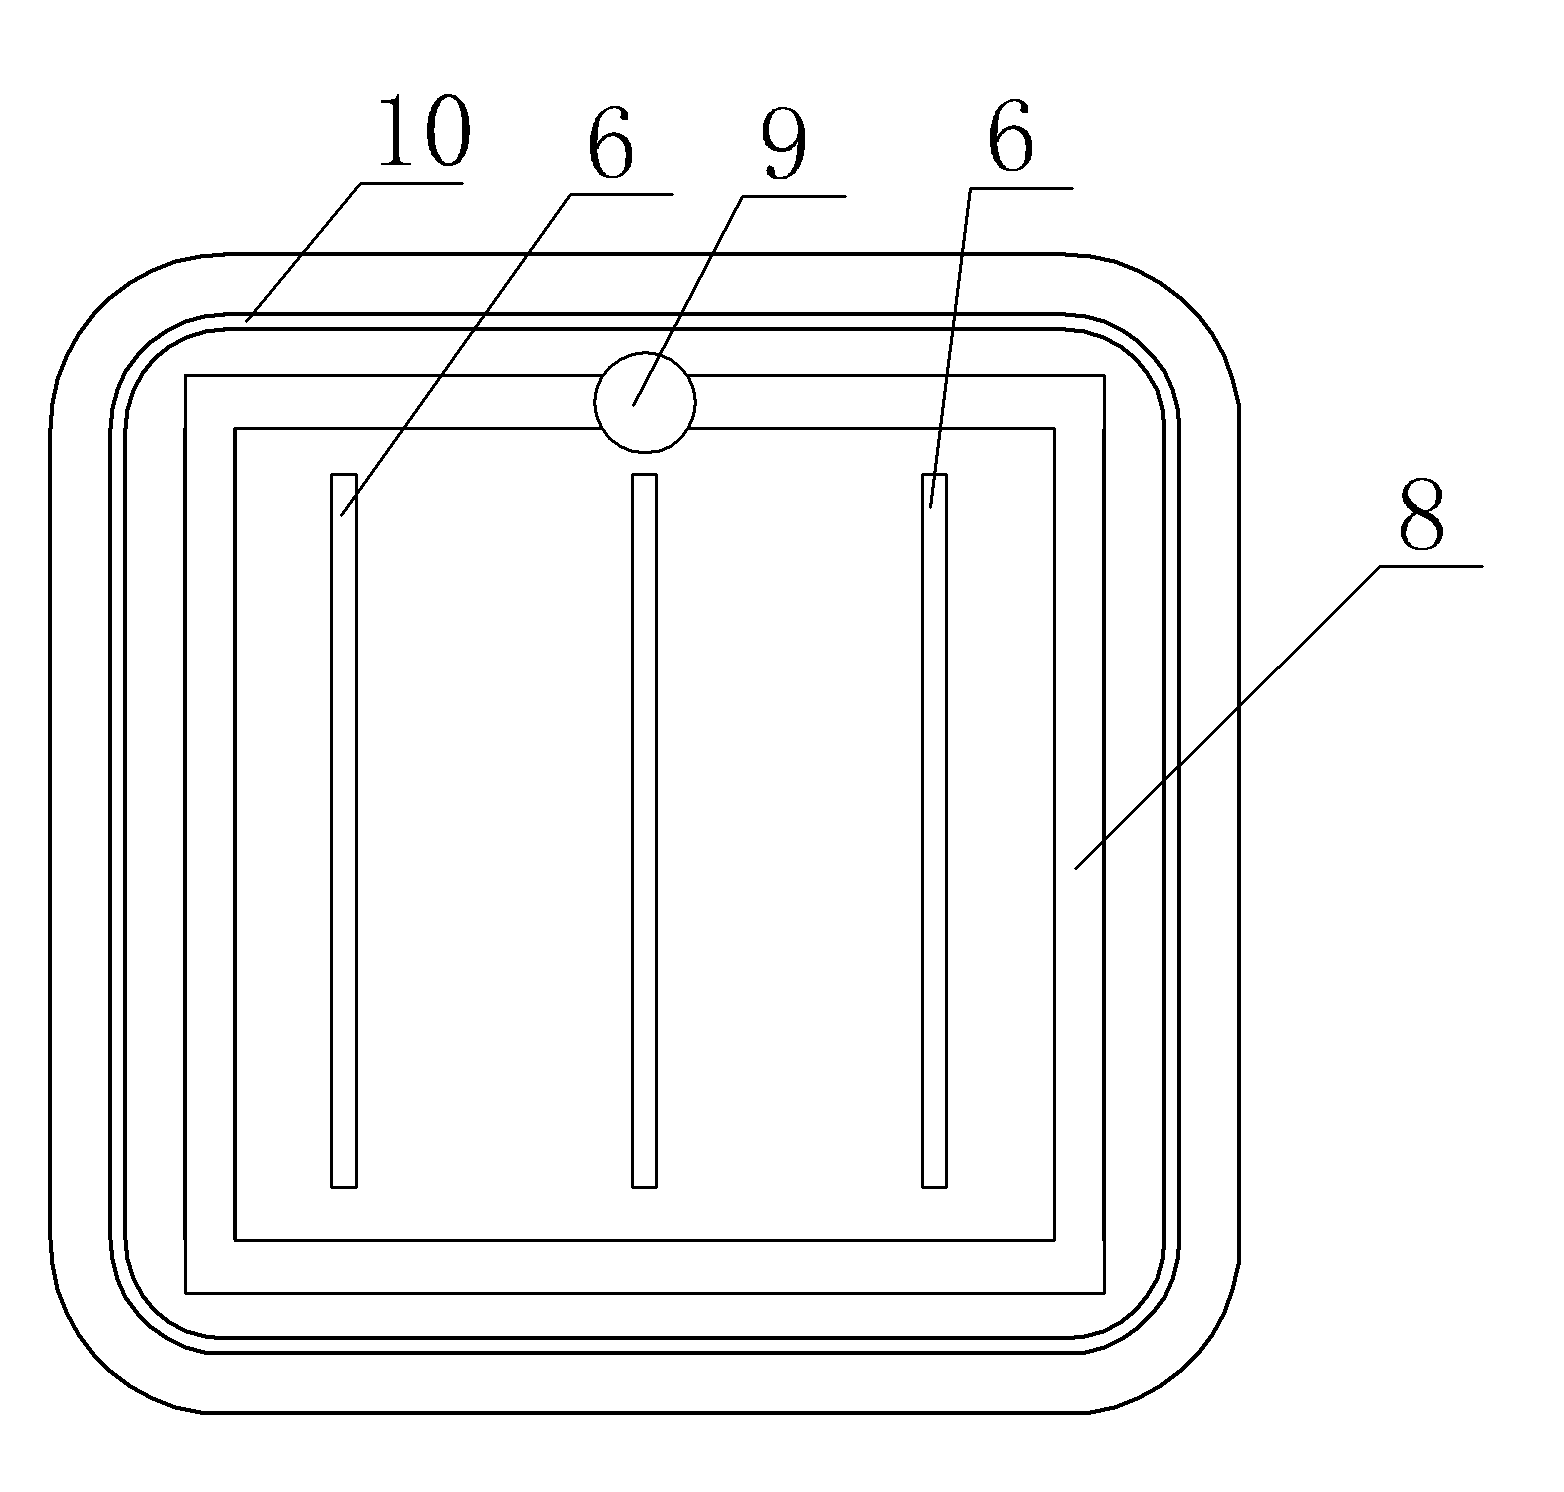 Three-channel cooling structure of CPU (Central Processing Unit)